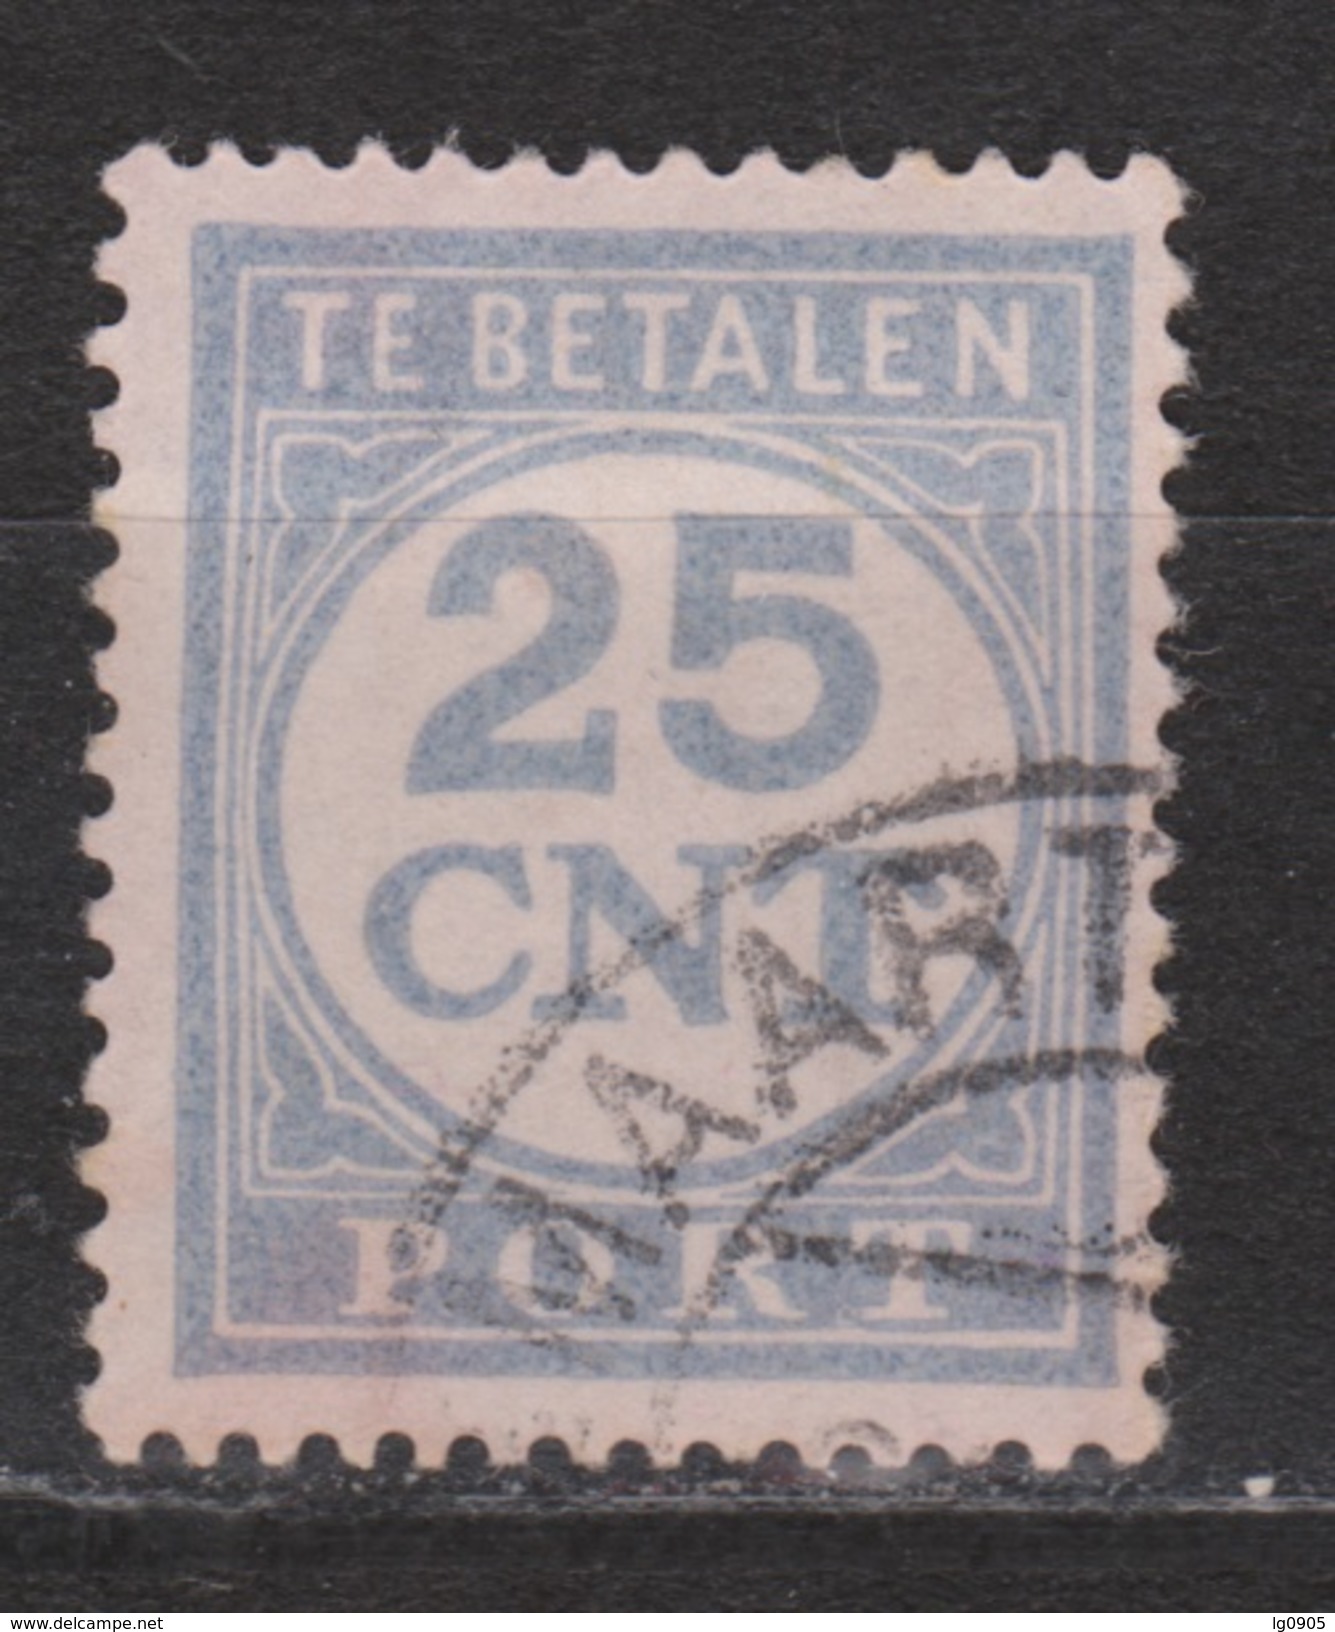 NVPH Nederland Netherlands Holanda Pays Bas Port 77 Used Timbre-taxe Postmarke Sellos De Correos NOW MANY DUE STAMPS - Postage Due